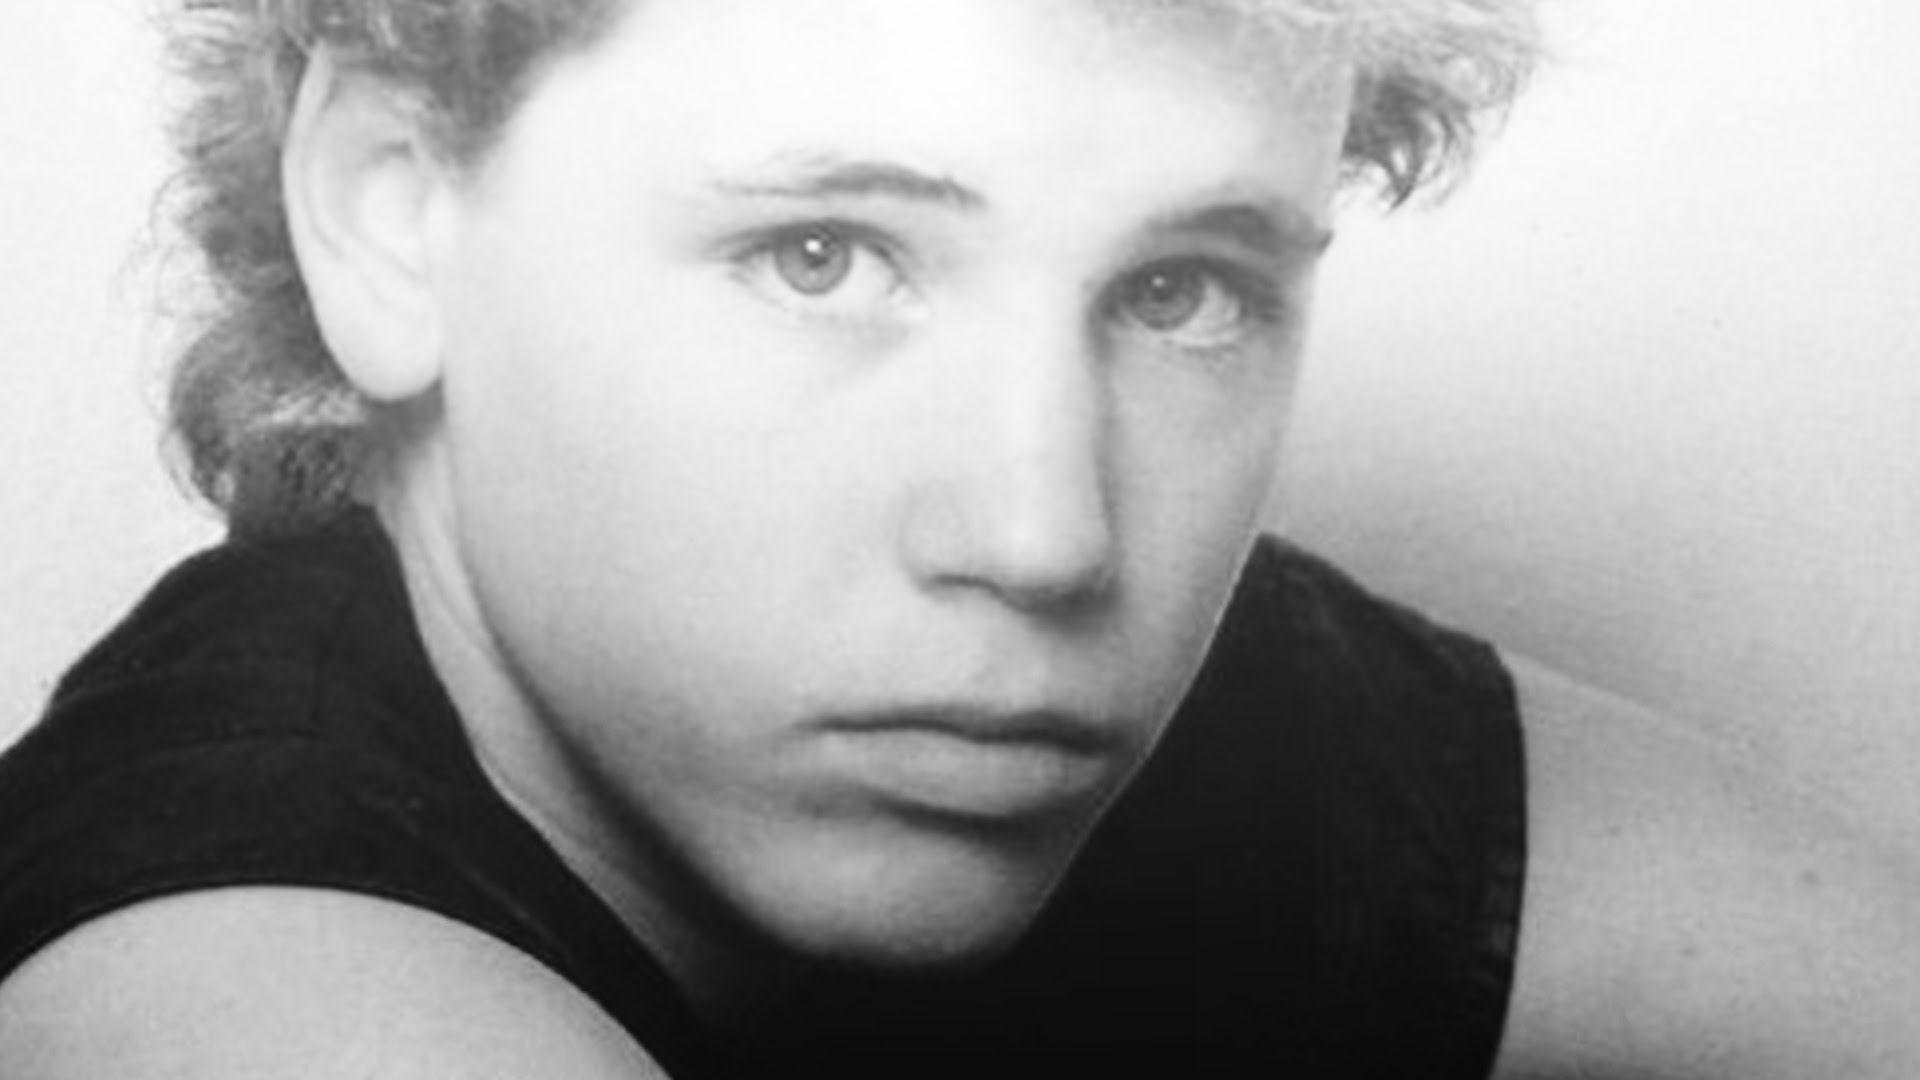 Scars and Souvenirs (For Corey Haim)